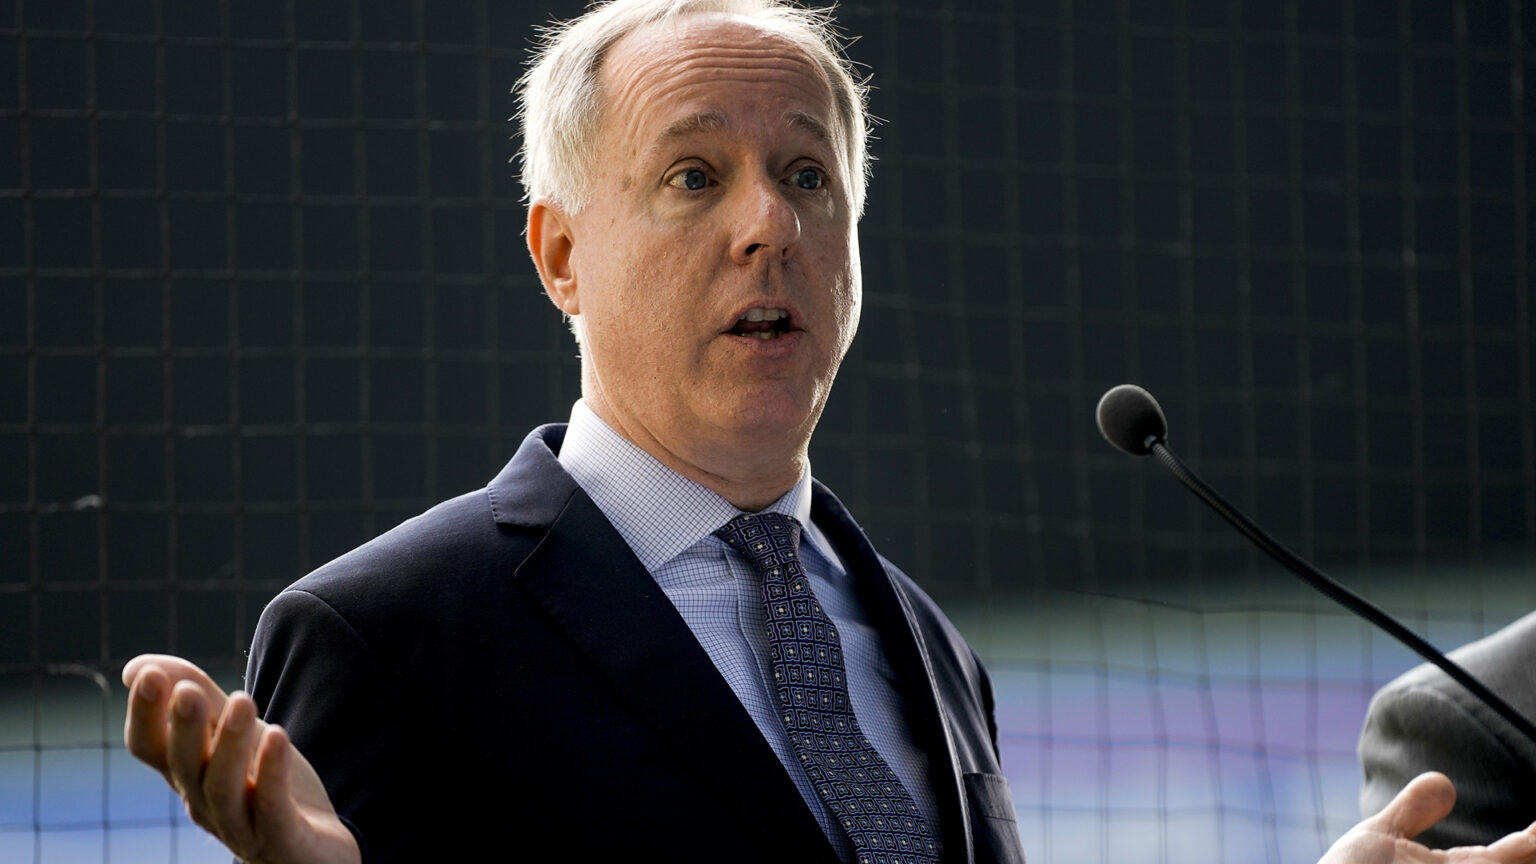 Robin Vos gestures with both hands while speaking into a microphone, with baseball backstop netting behind him.